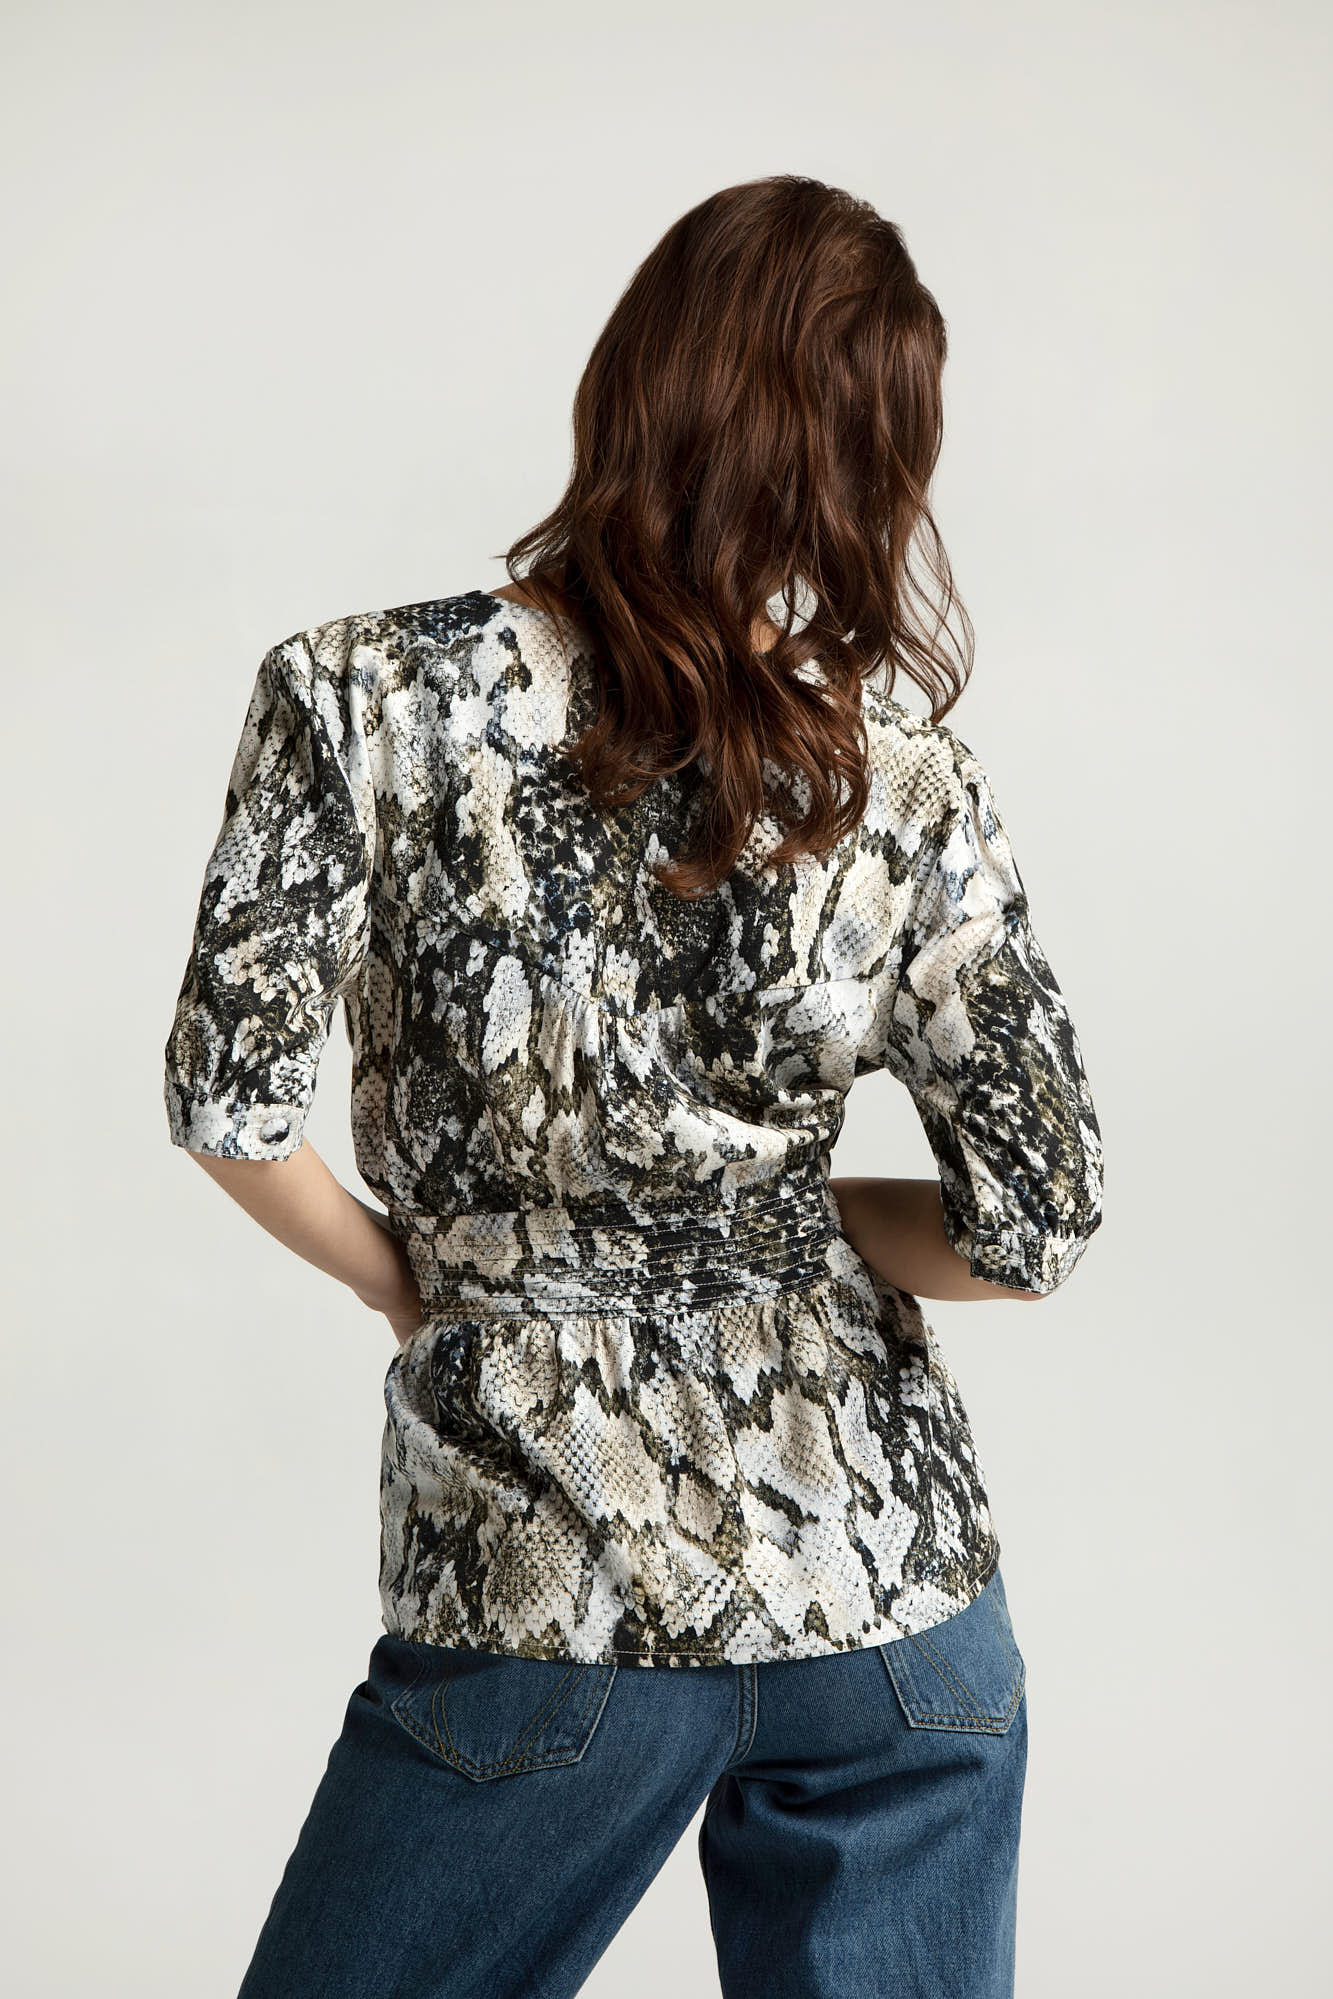 Blouse LILLMOR in animal print by LOVJOI made from Ecovero™